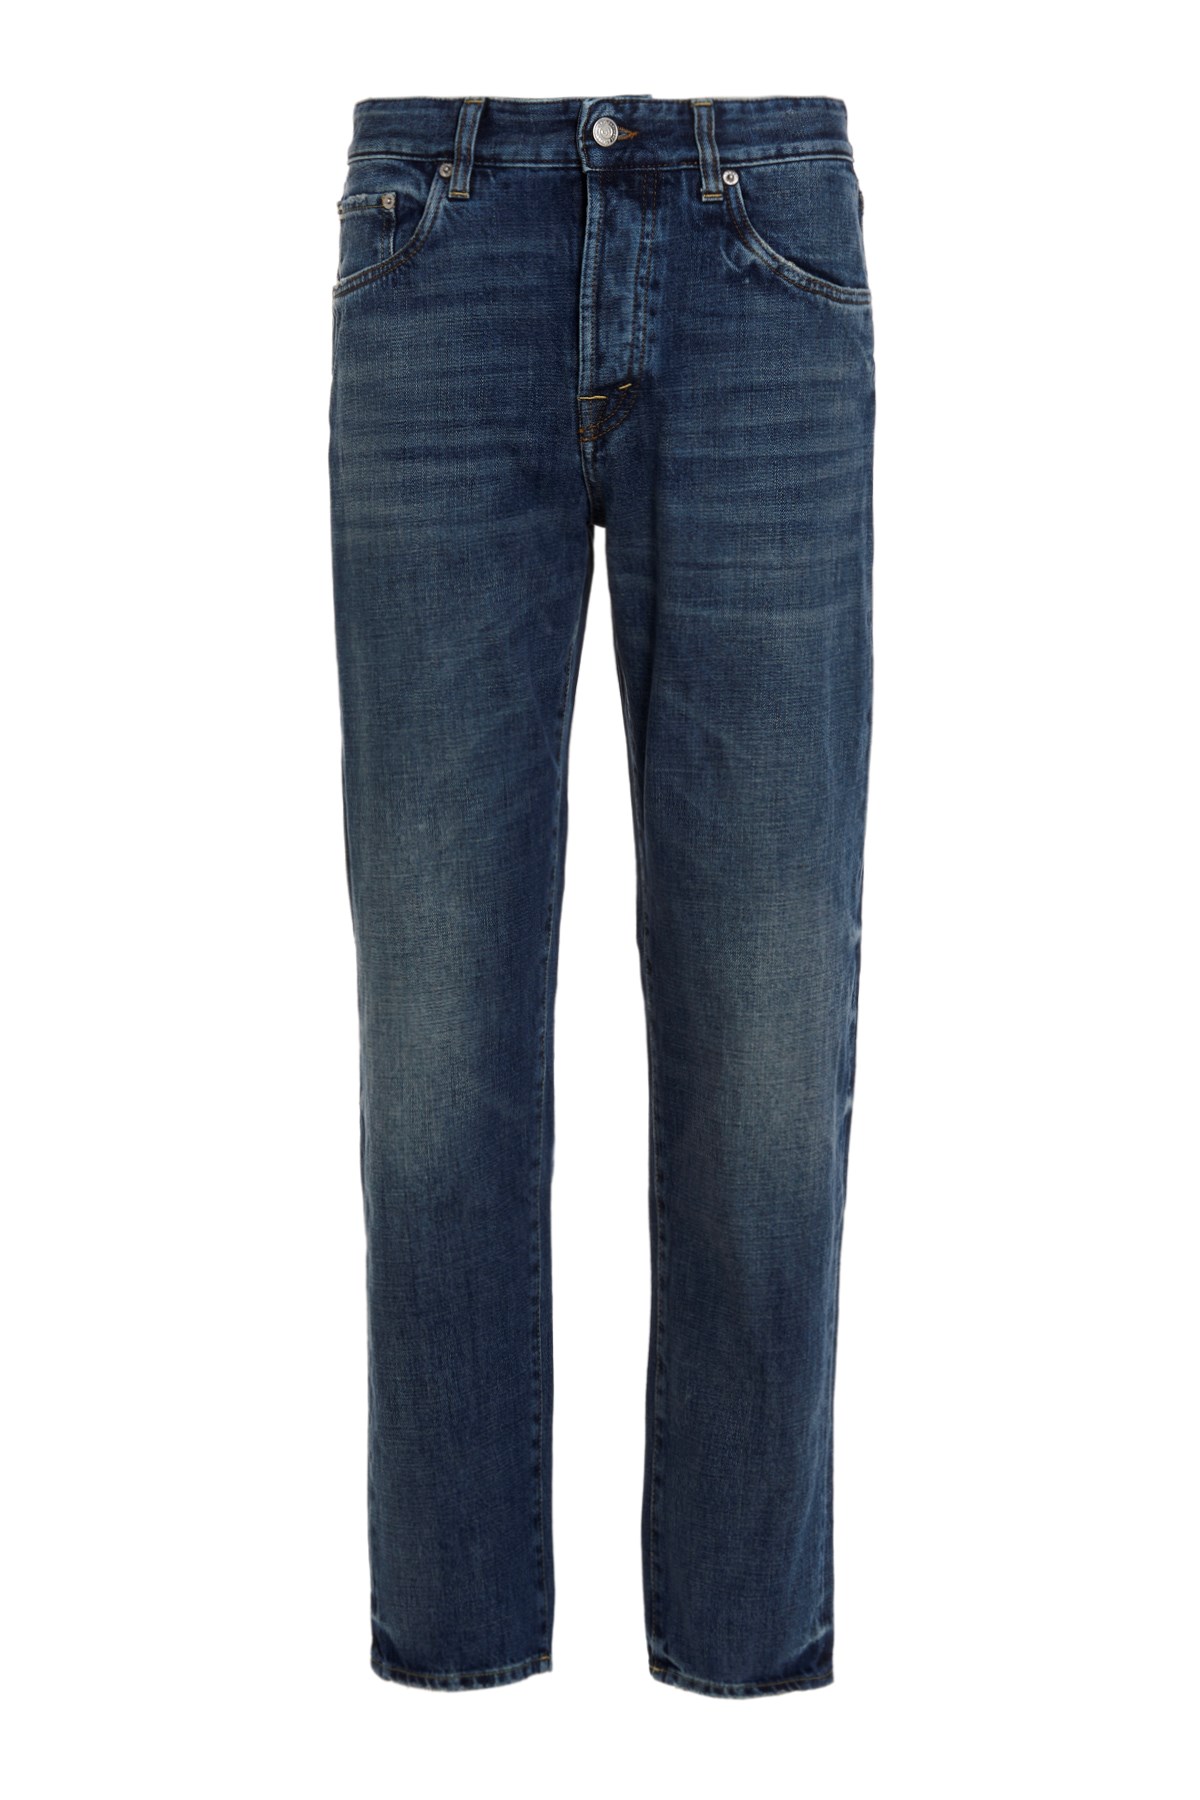 DEPARTMENT 5 'Newman’ Jeans